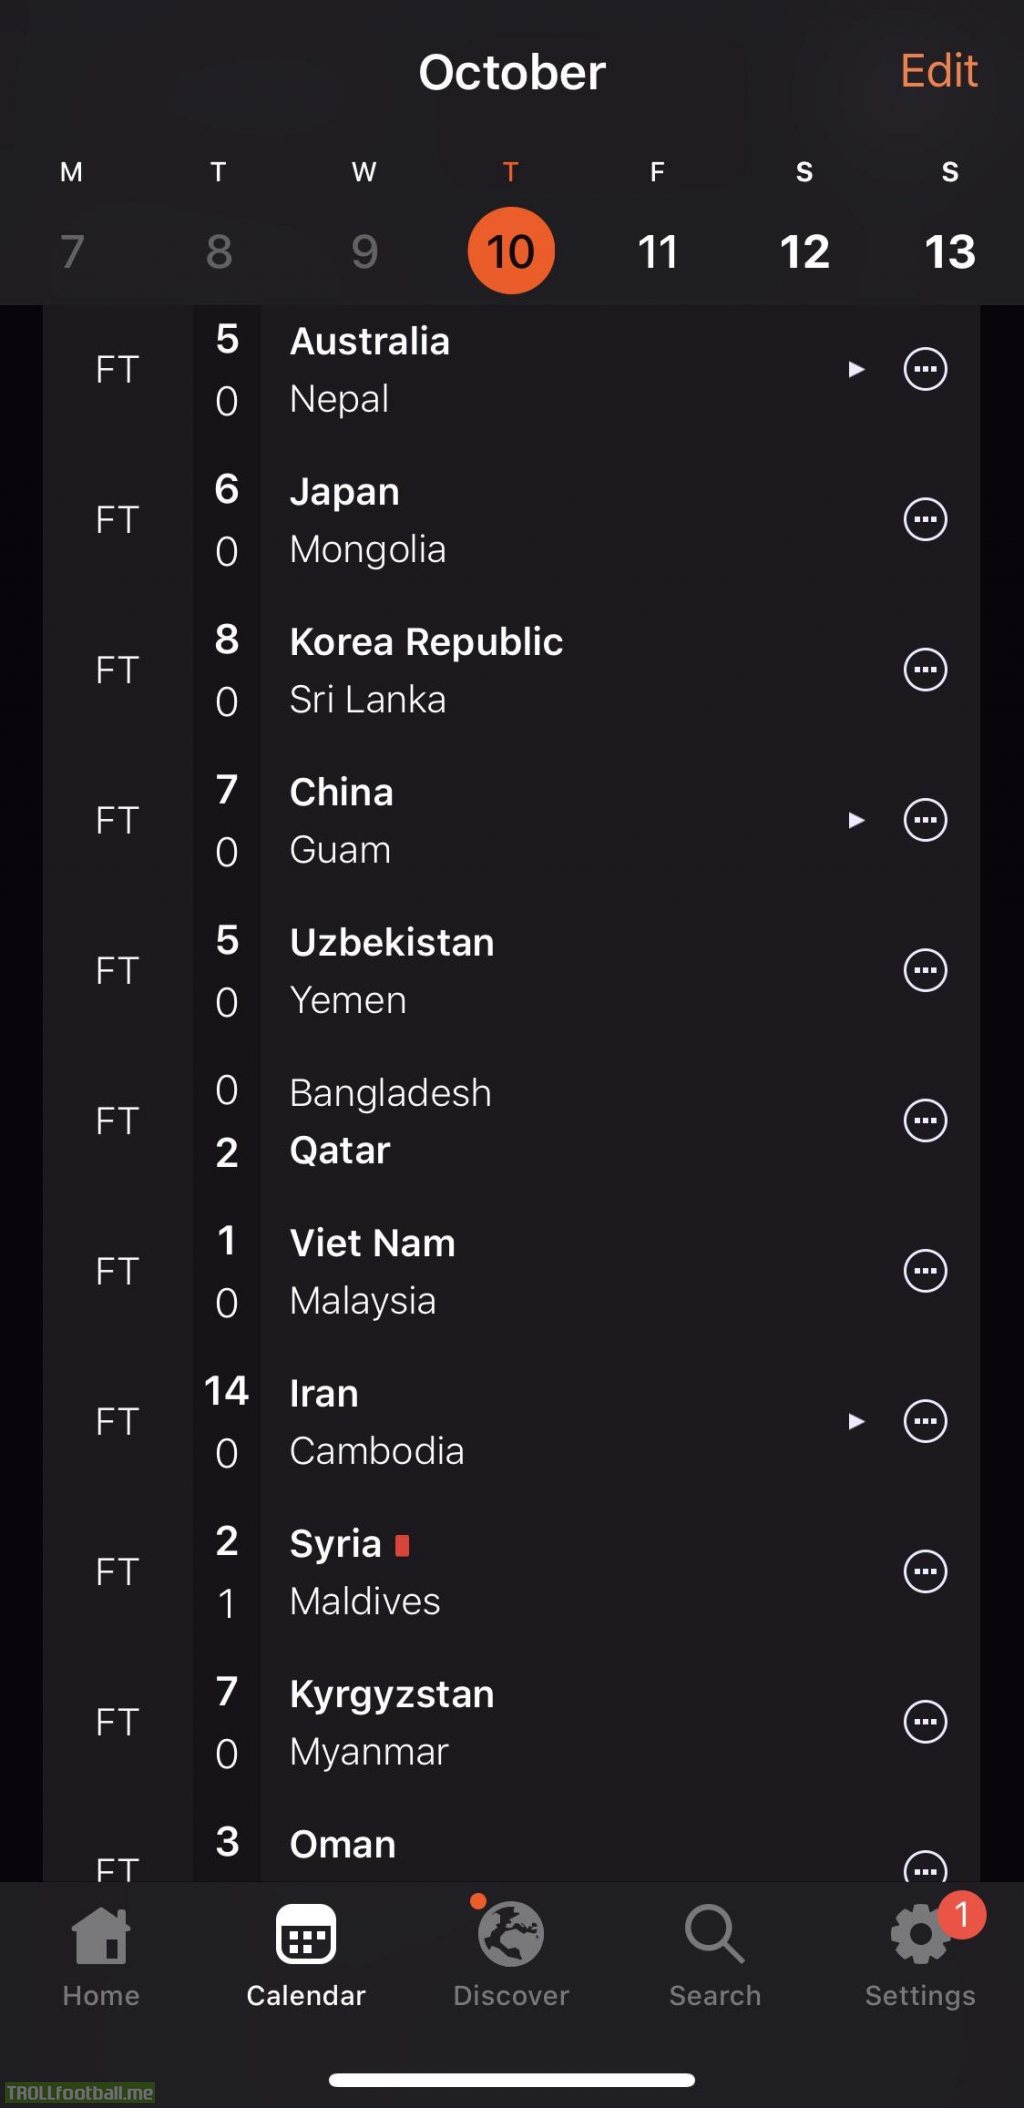 Results from the World Cup qualifying round - Asia 😳